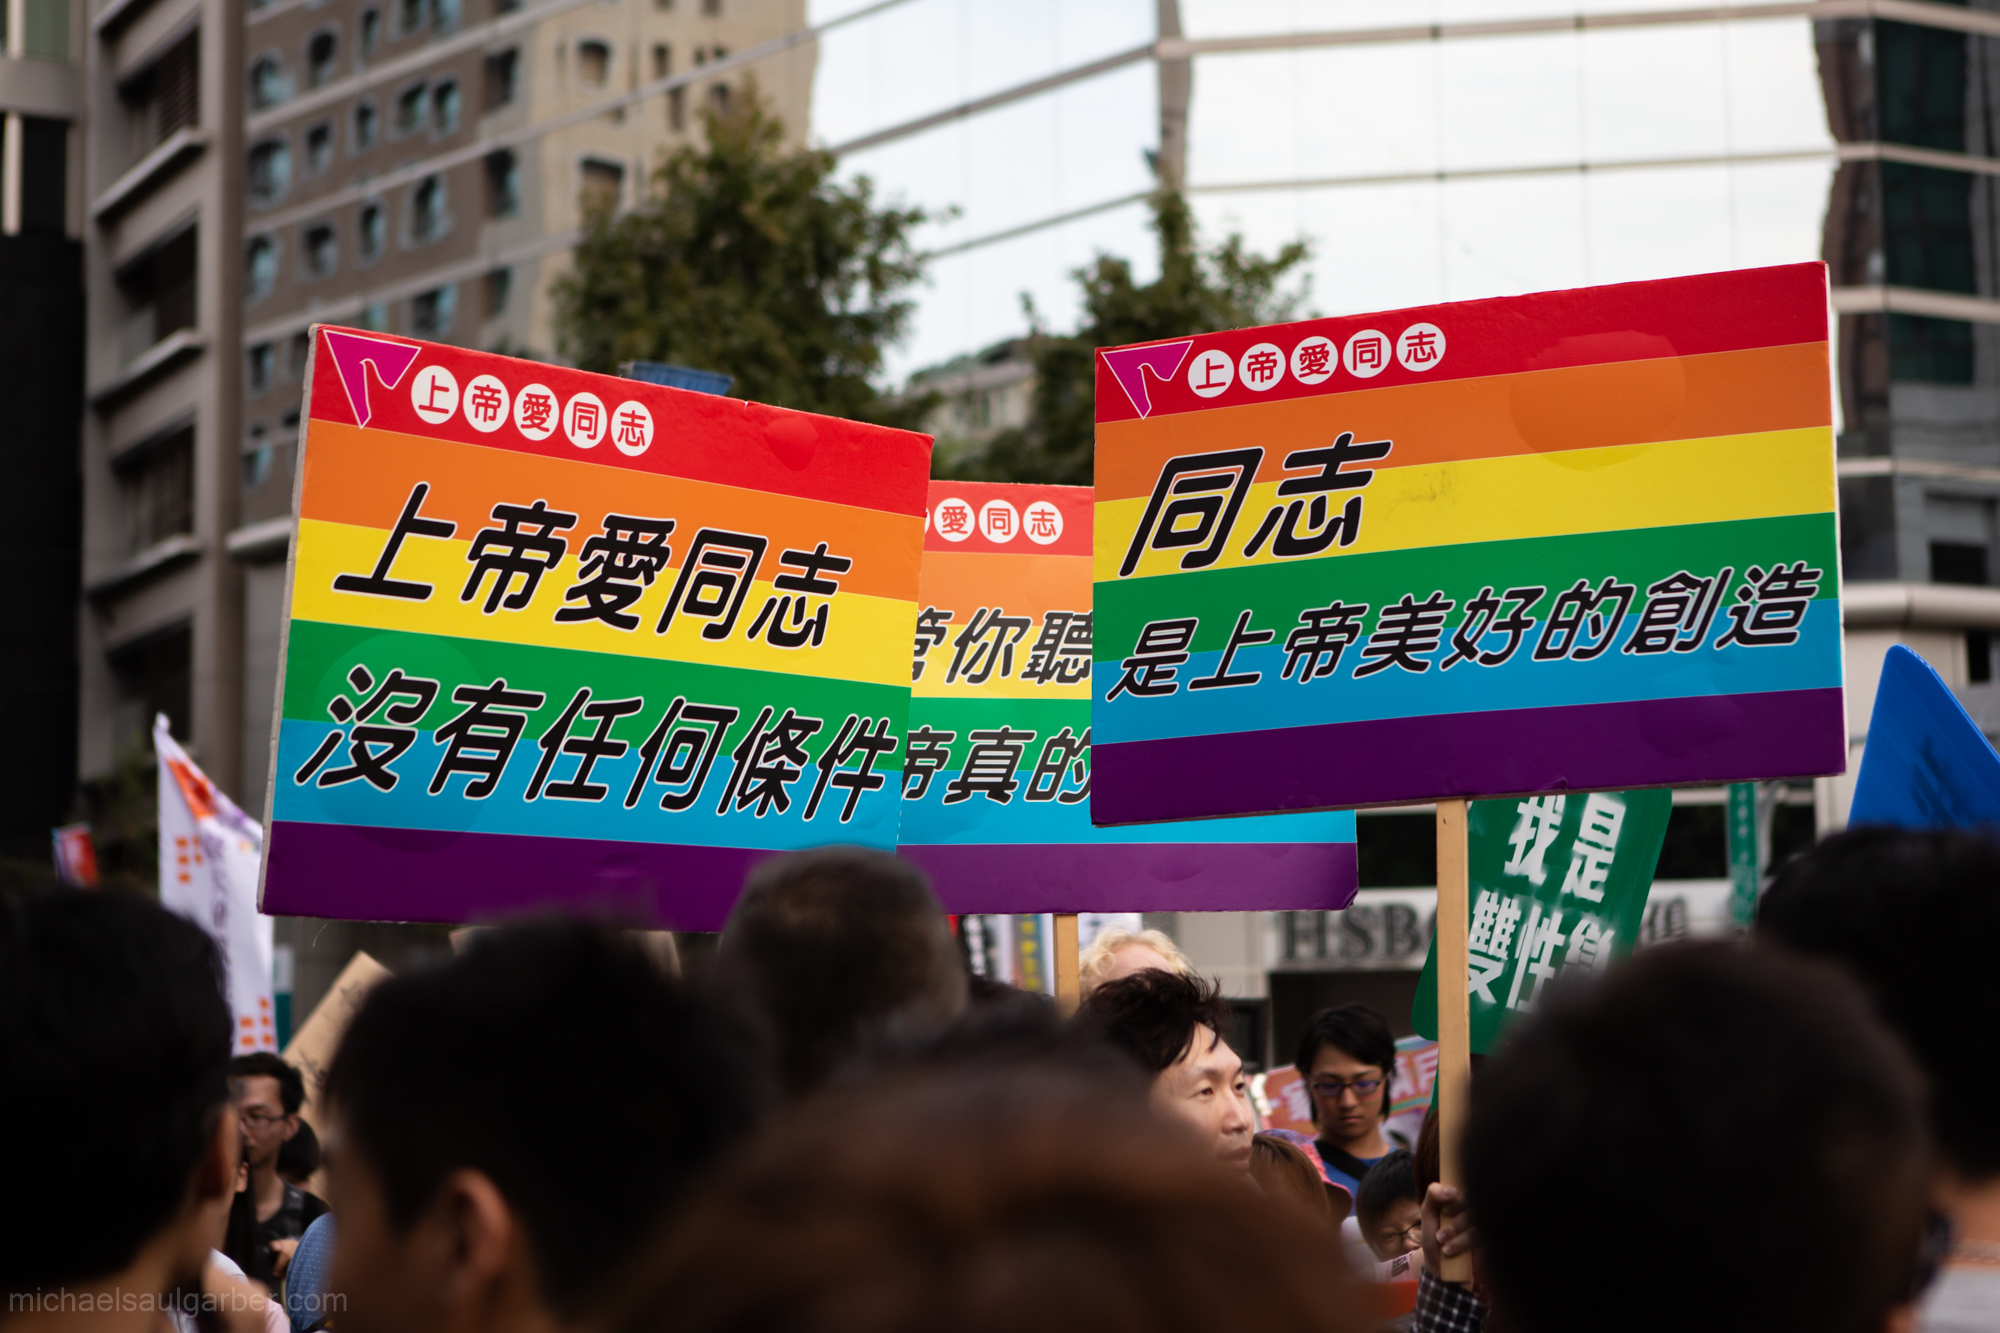 Sign reads, "God loves gays without conditions" and "Gays are God's beautiful creation", Taiwan Pride, 2014